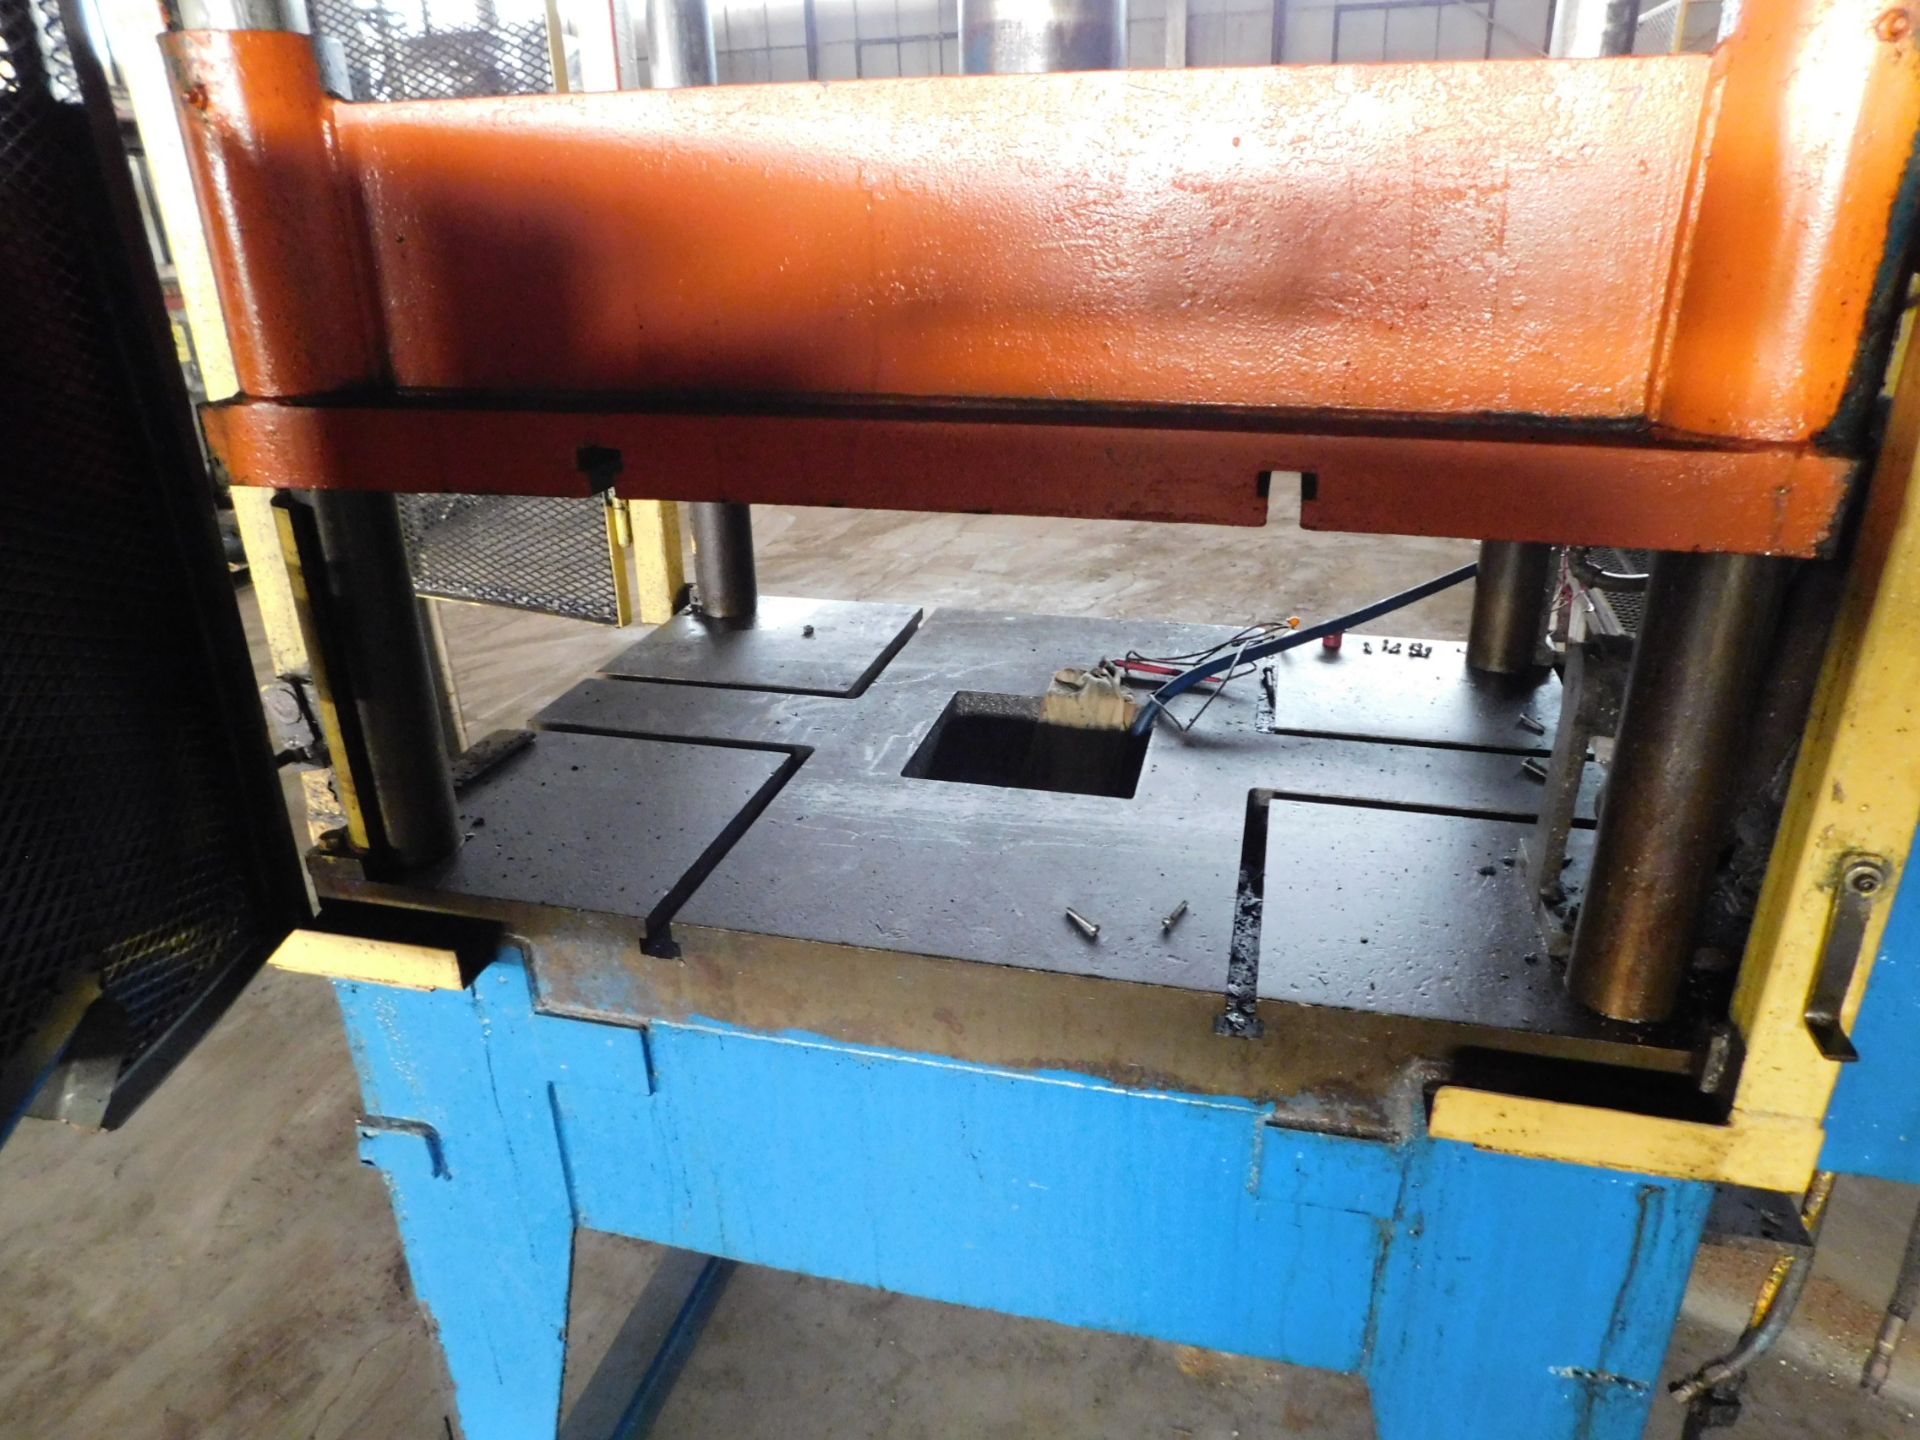 4-Post Hydraulic Press, 32" X 44" Bed and Ram, Approx. 12" Stroke, 13" Daylight with Ram Down - Image 3 of 6